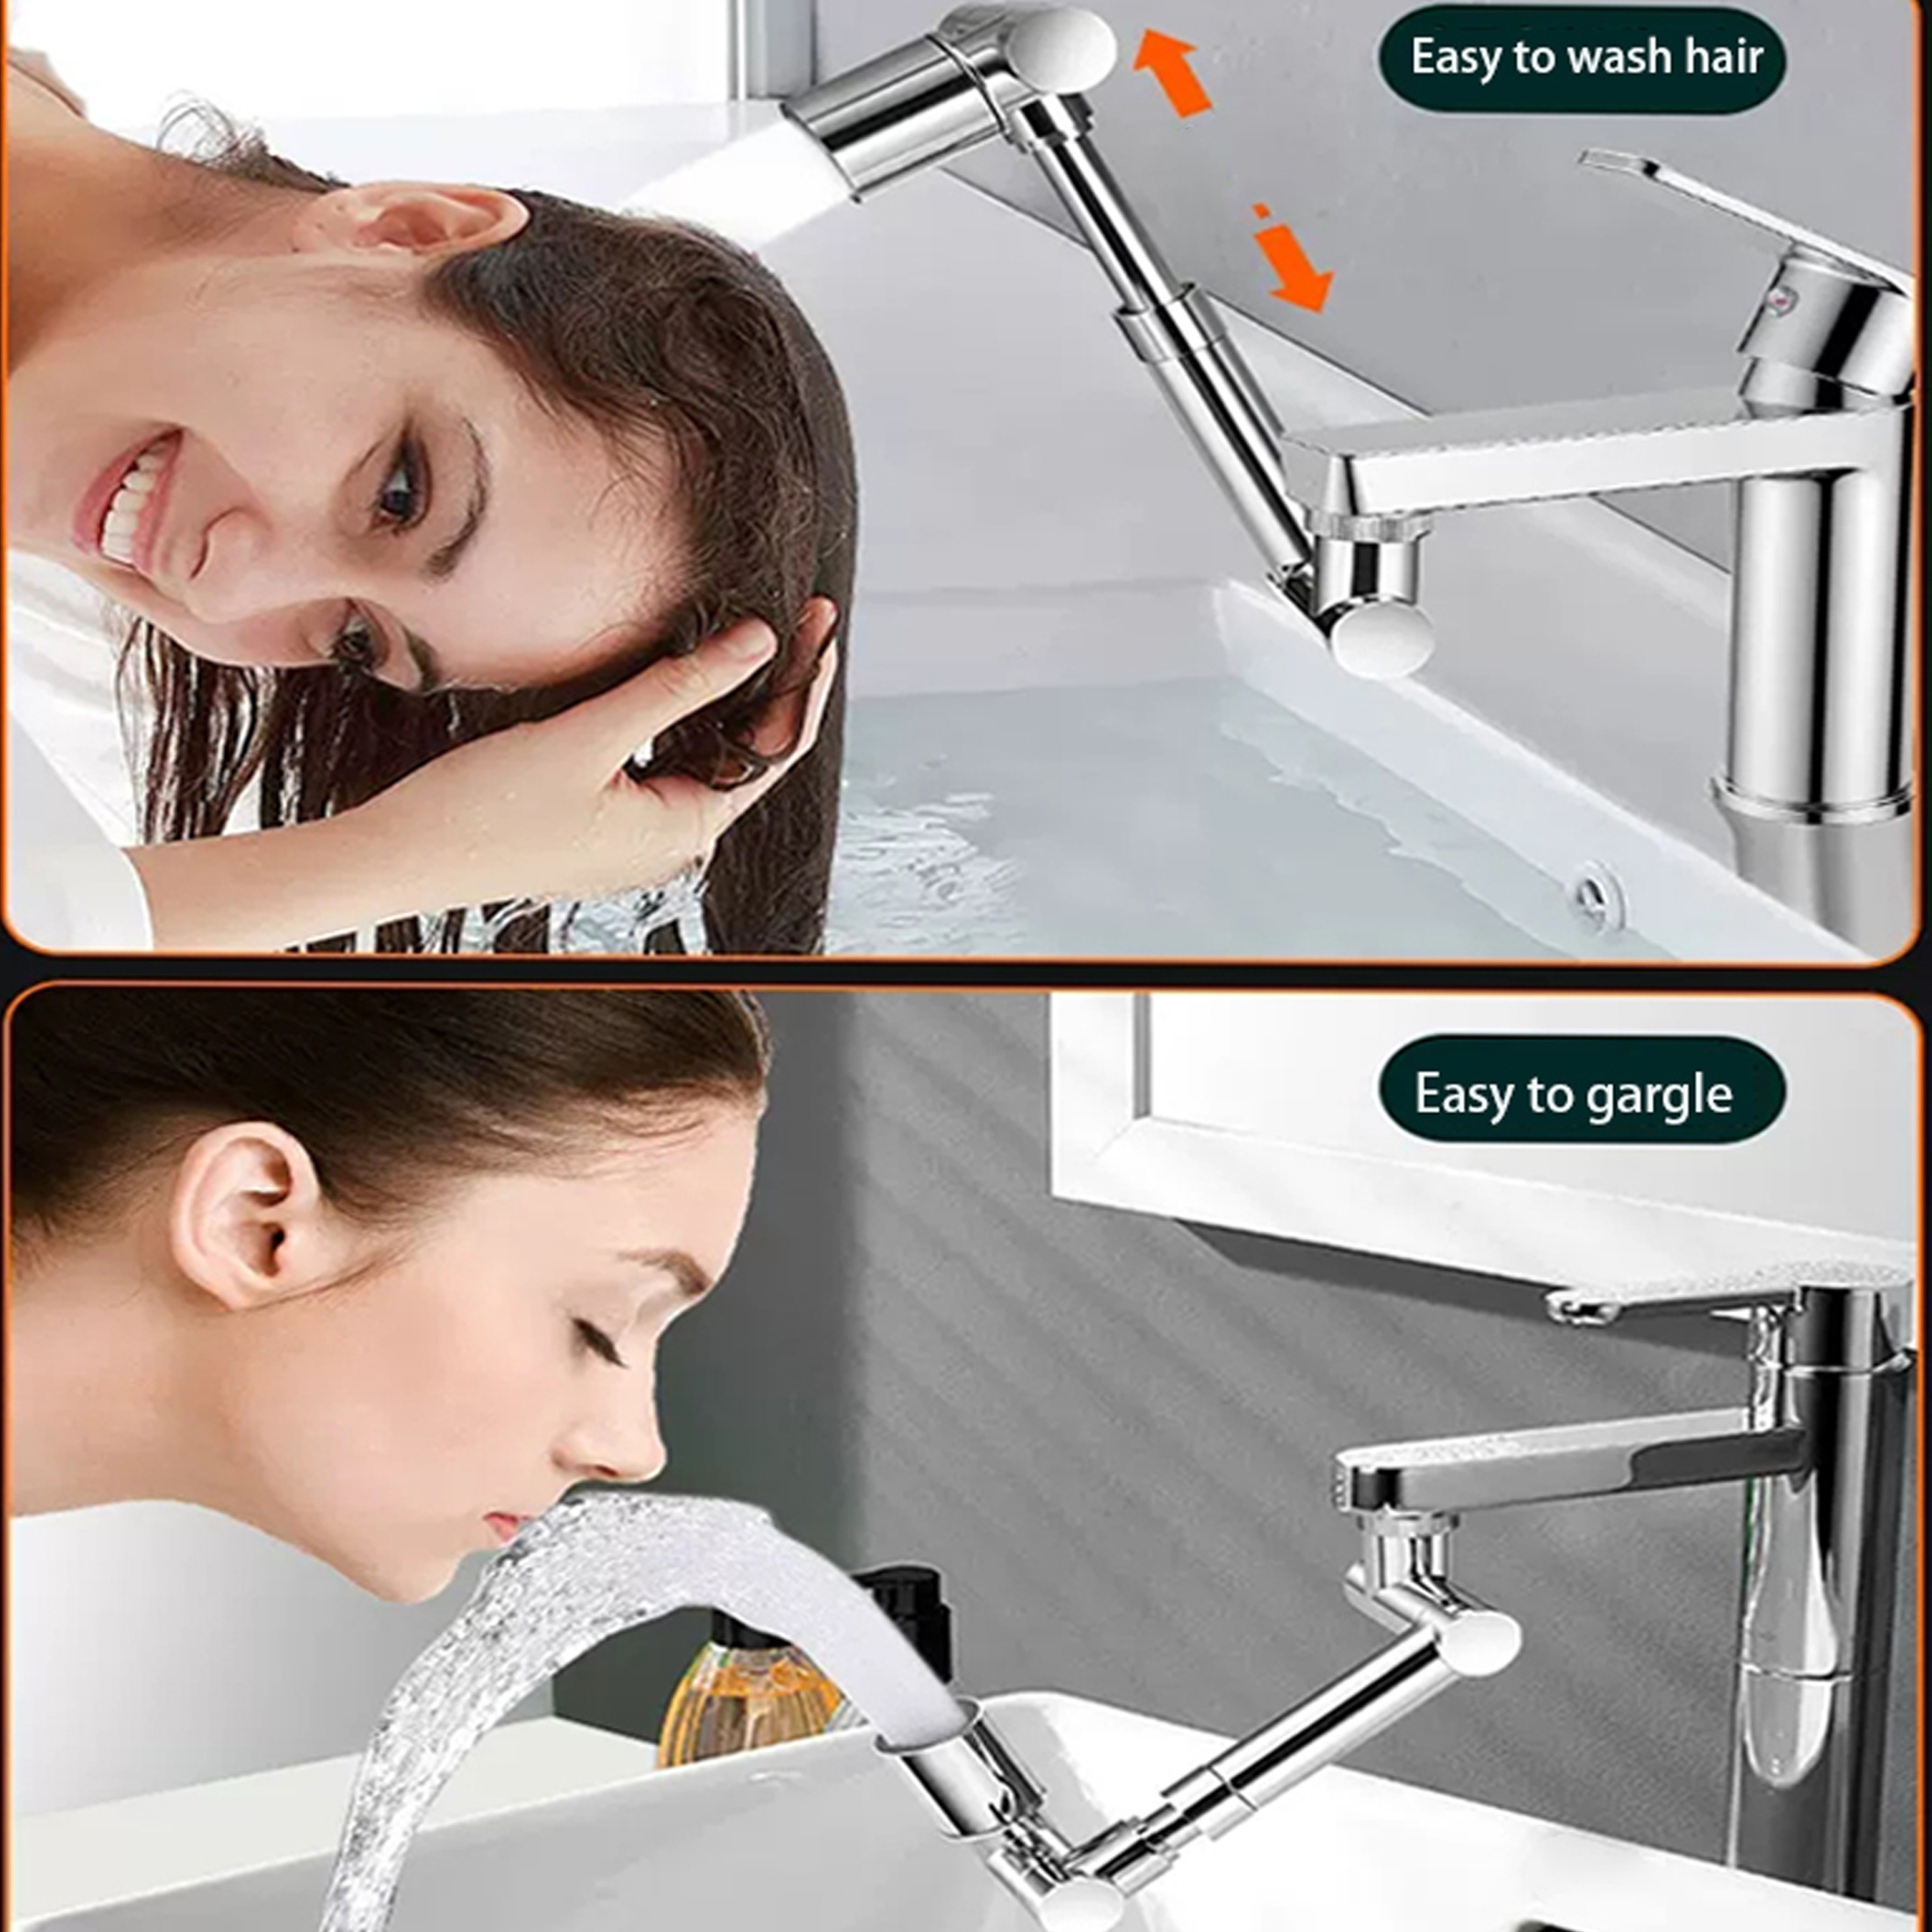 

360 Degree Rotatable Faucet Extension Tubes - Universal Splash Filter Faucet Aerator - Adjustable Water Tap Extension For Hair Washing, Dental Rinsing - Plastic And Copper Alloy Construction